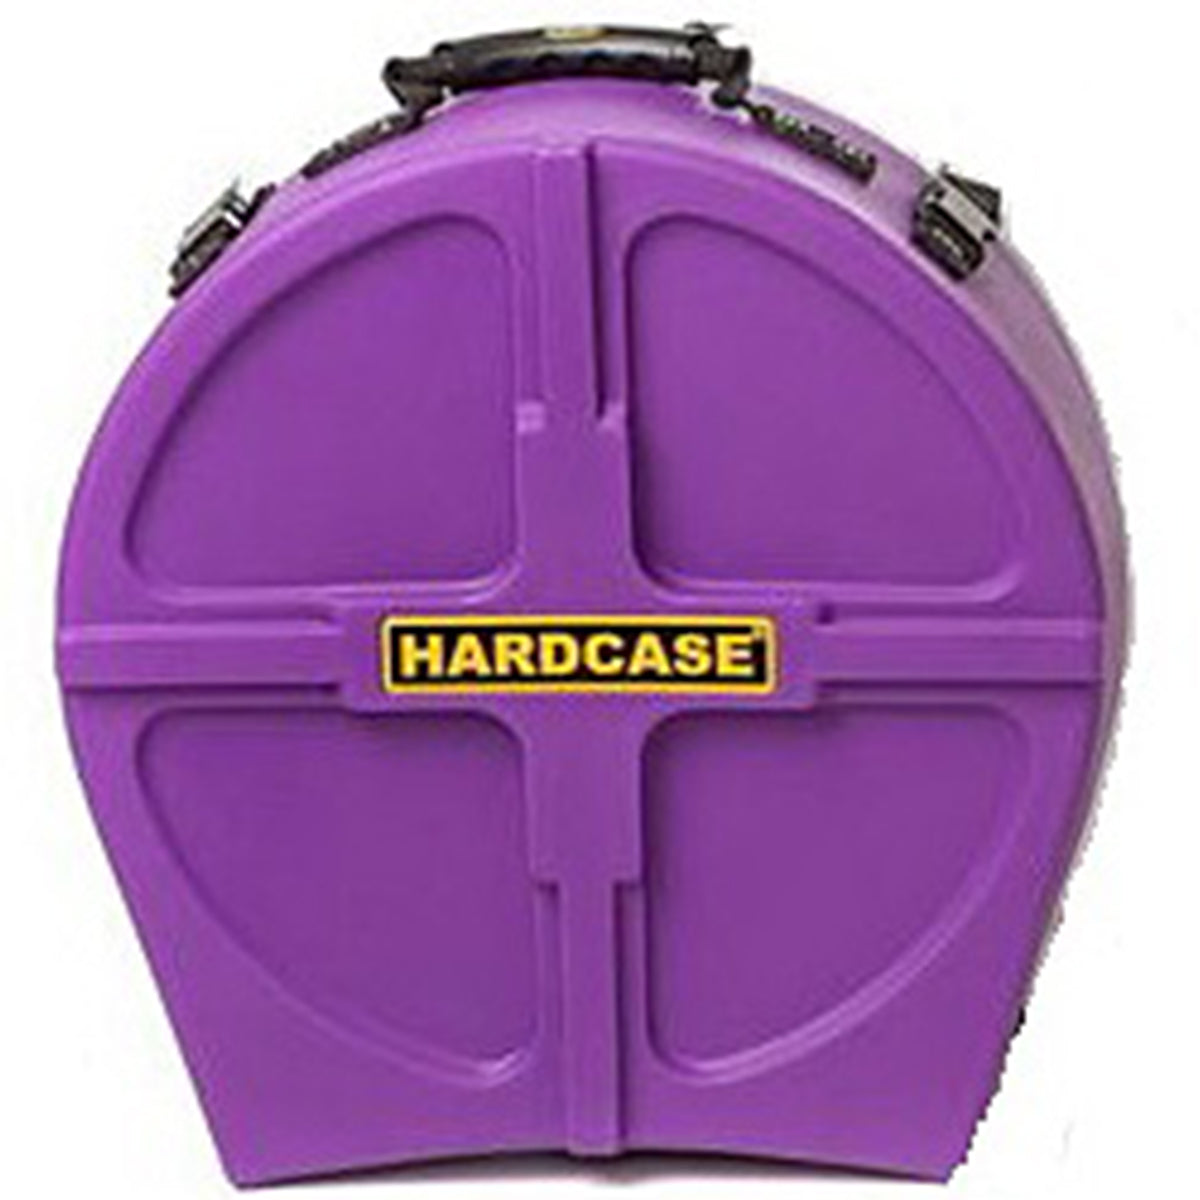 Hardcase HNL14S-PU Snare Drum Case Lined Purple 14inch